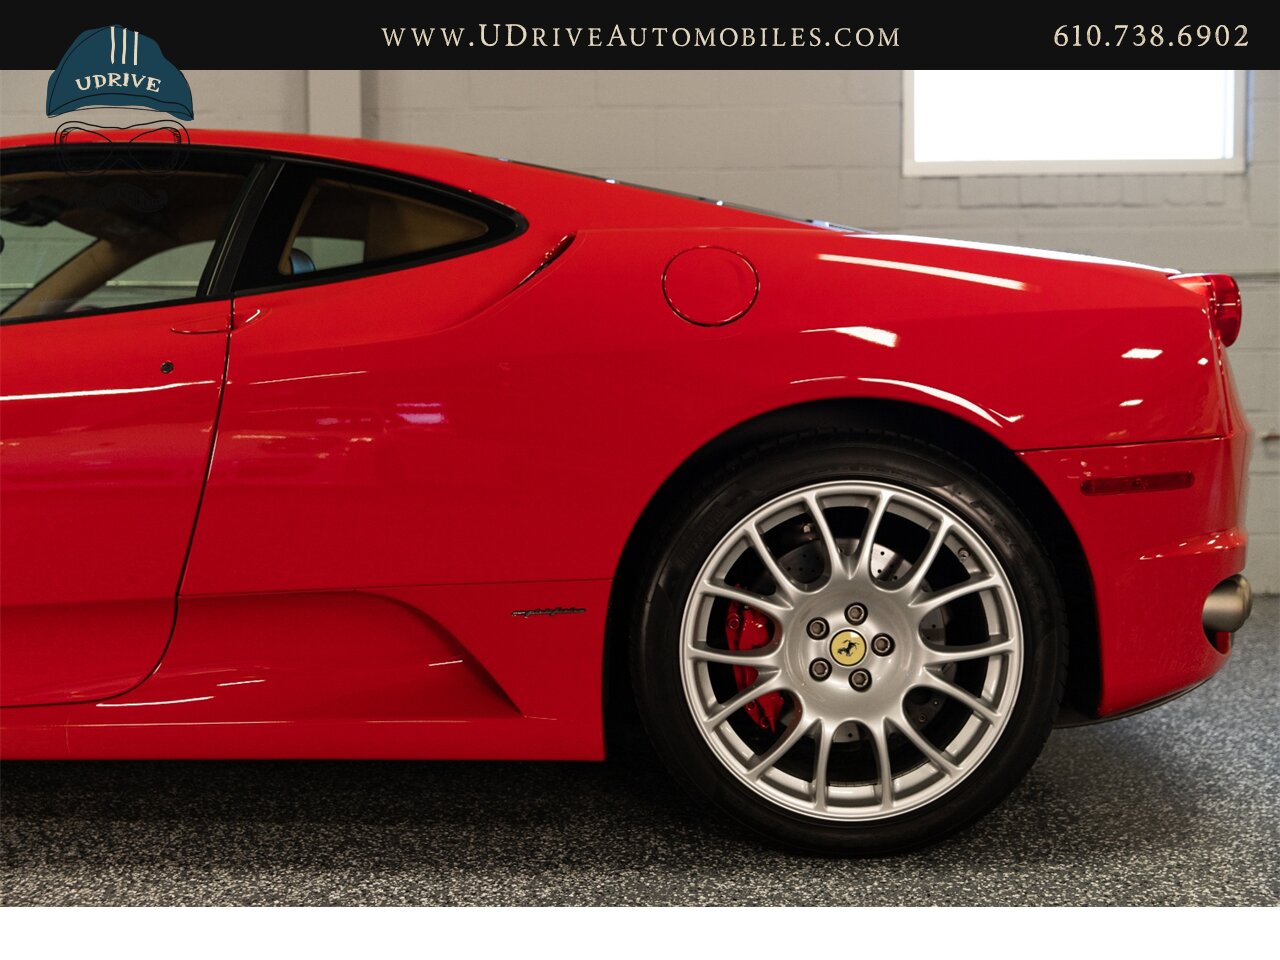 2006 Ferrari F430 F1 Coupe 1 Owner Daytona Seats Challenge Whls  Carbon Fibre Upper Lower Zone Shields Piping Serv Hist $208k MSRP - Photo 21 - West Chester, PA 19382